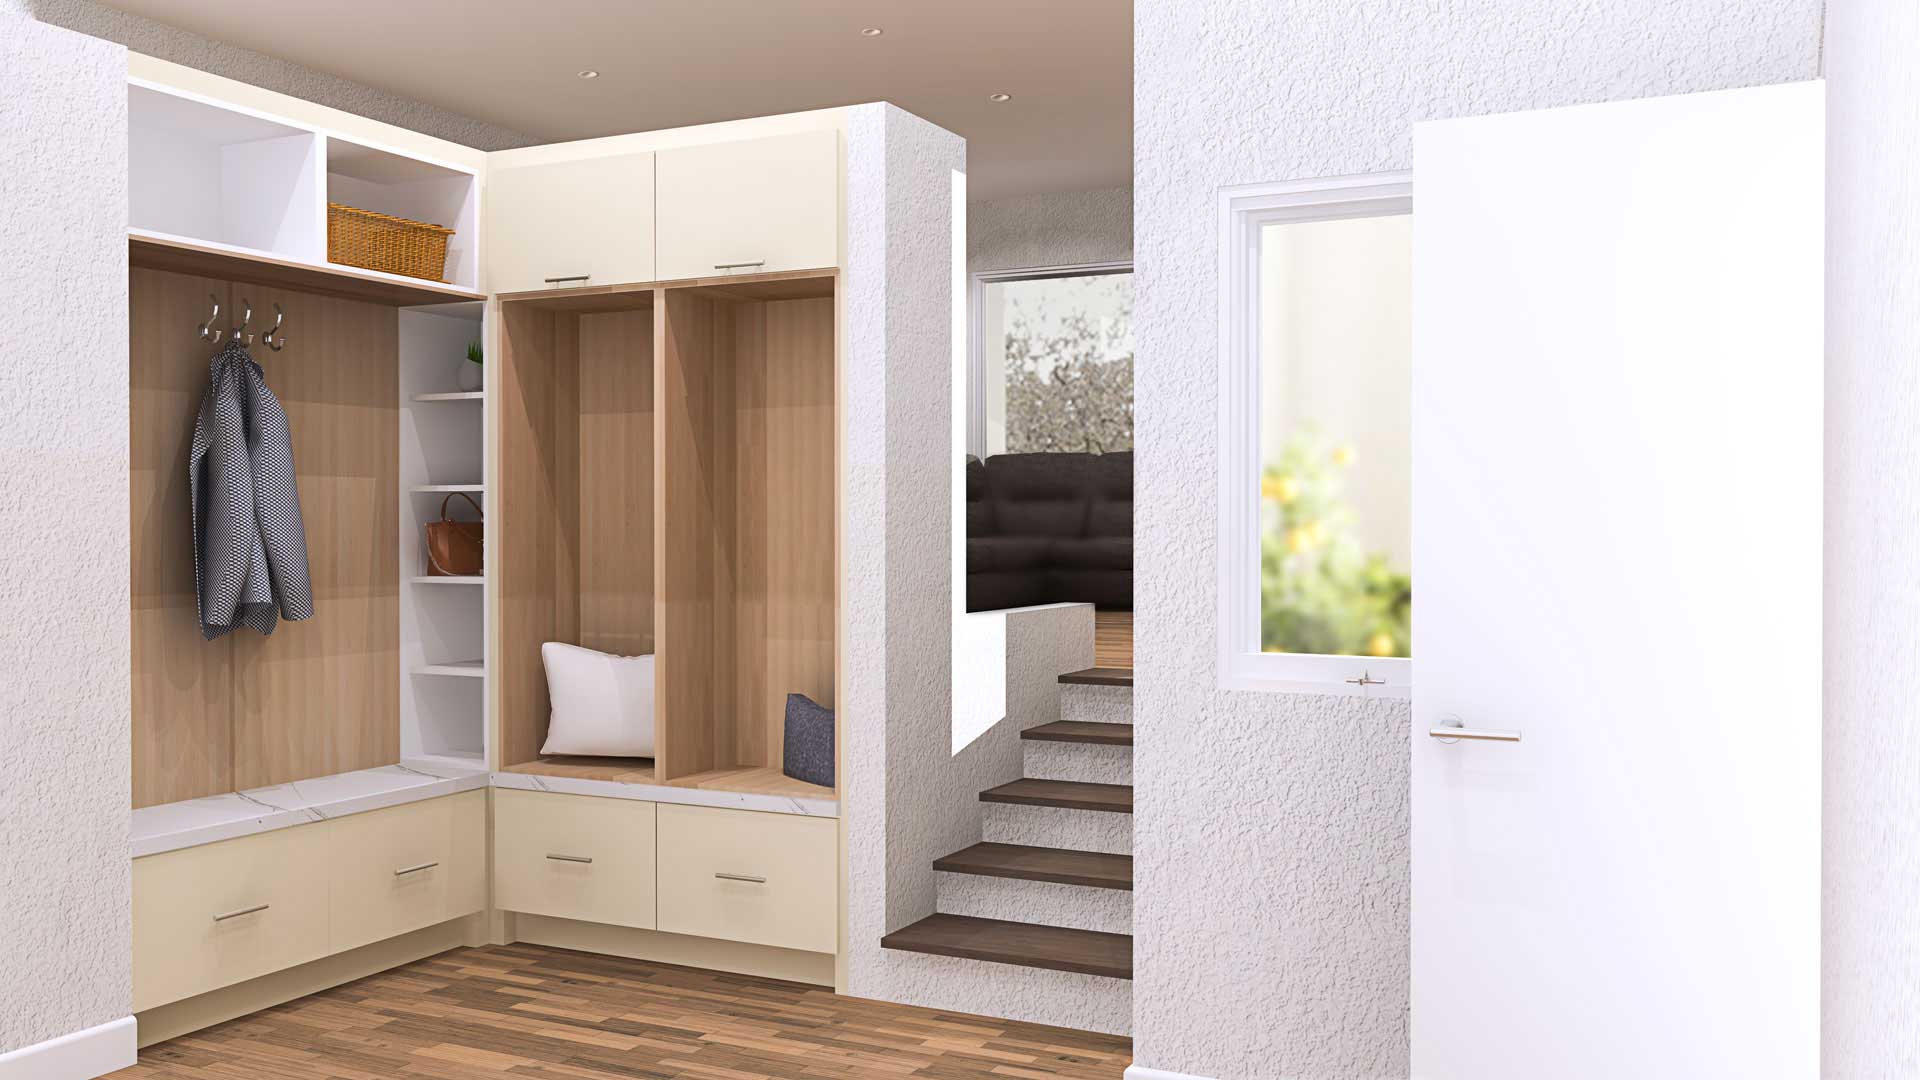 IKEA mudroom design concept and featured image